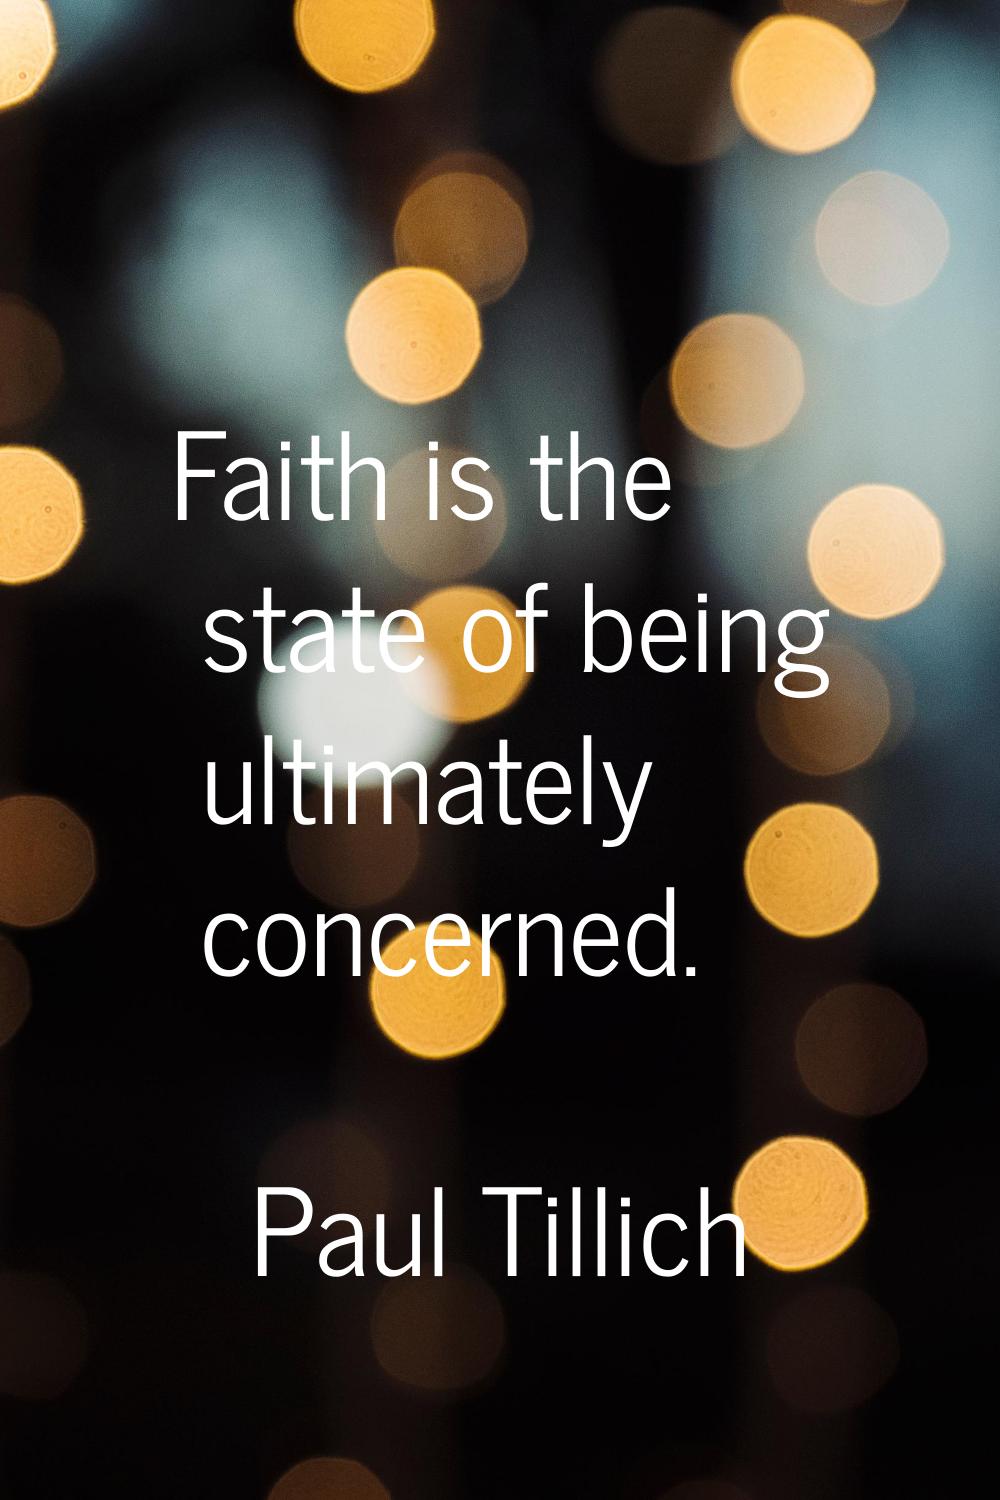 Faith is the state of being ultimately concerned.